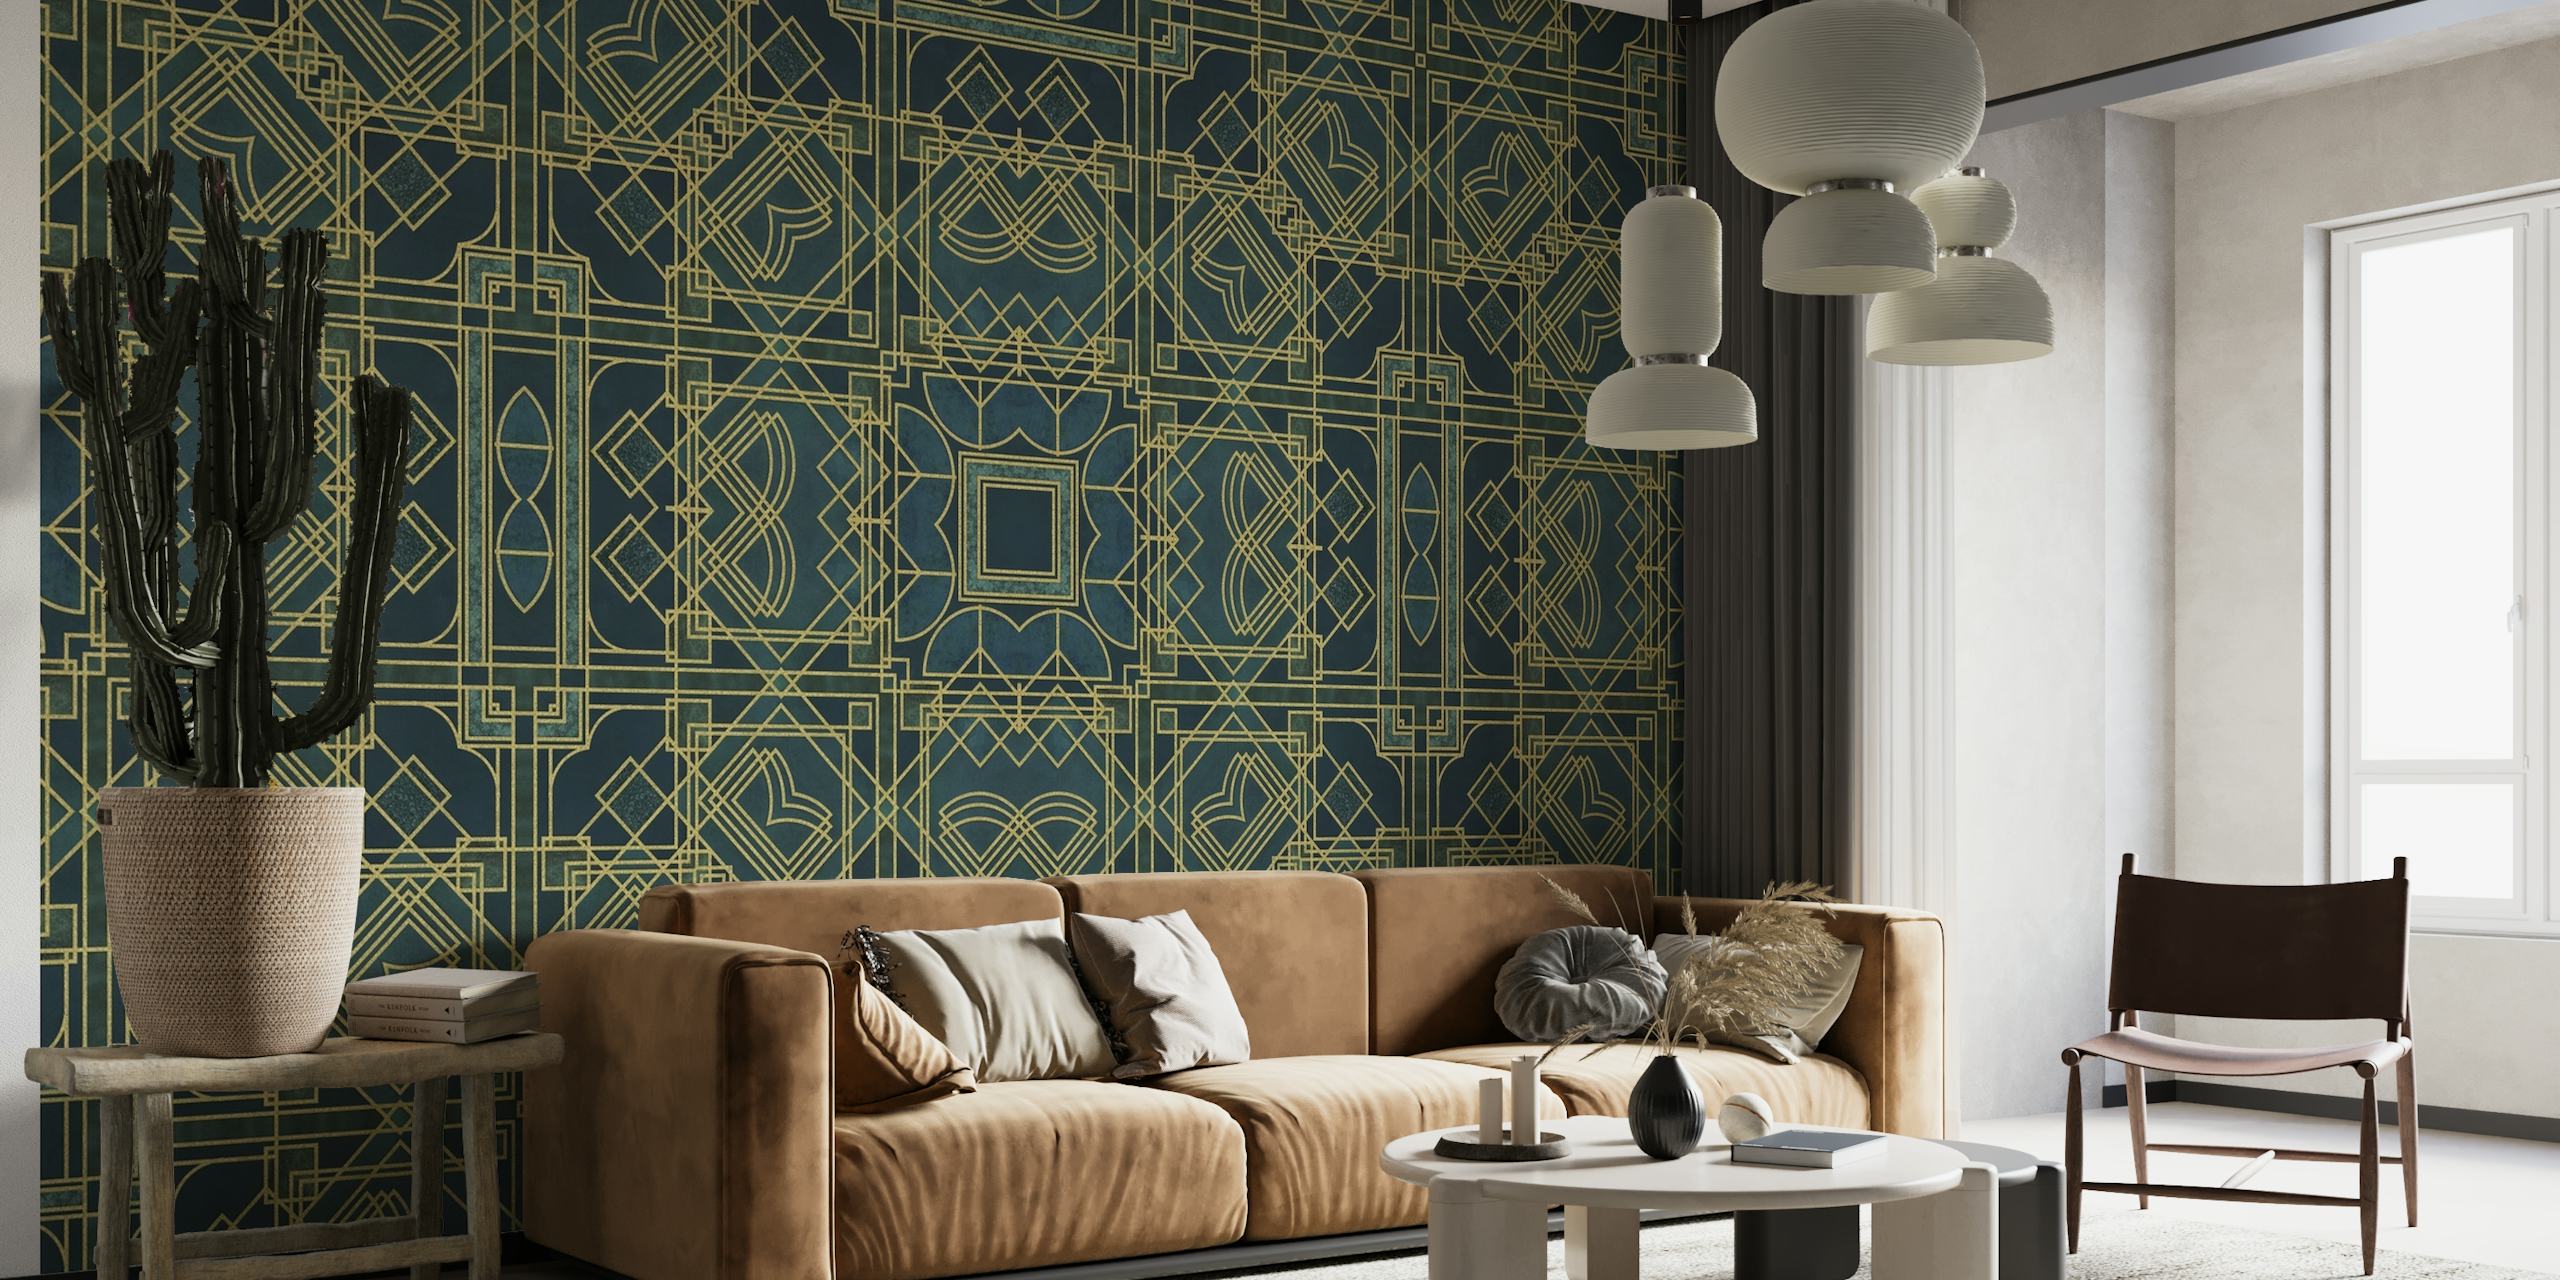 Art Deco style wall mural with golden geometric patterns on a navy background